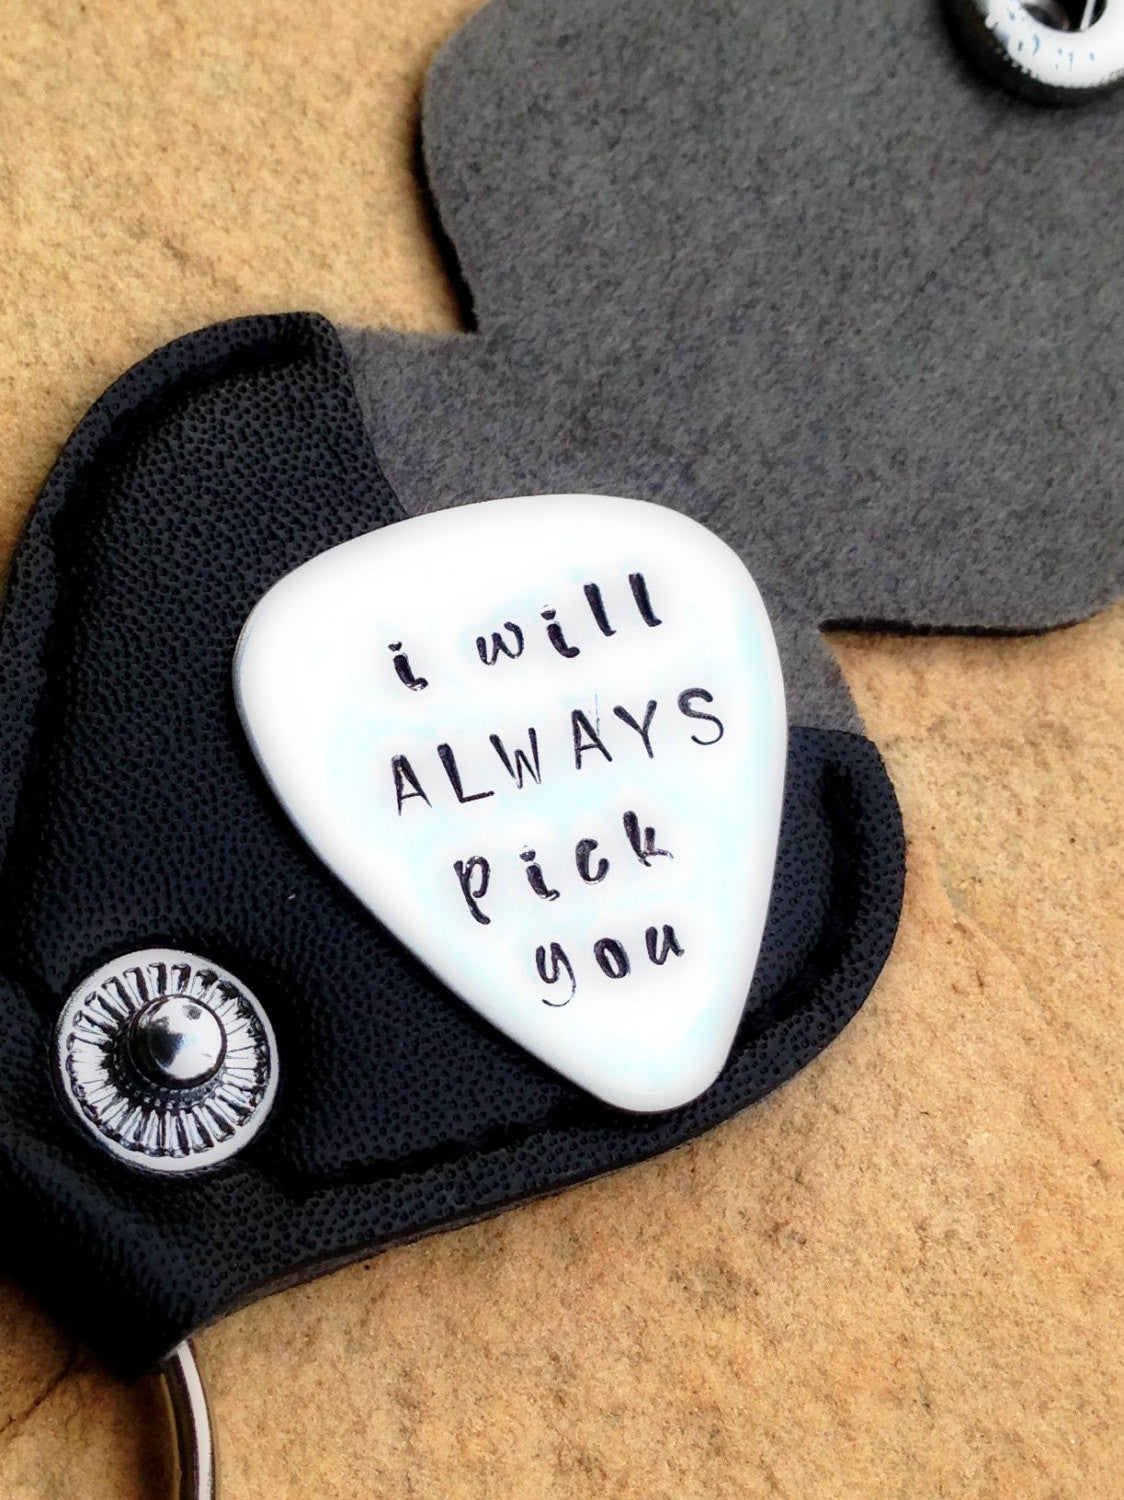 Personalized Pick with your message, Husband Gift, Fathers Day Gift,  Boyfriend Gift, Custom Pick,Personalized Guitar Pick, natashaaloha - Natashaaloha, jewelry, bracelets, necklace, keychains, fishing lures, gifts for men, charms, personalized, 